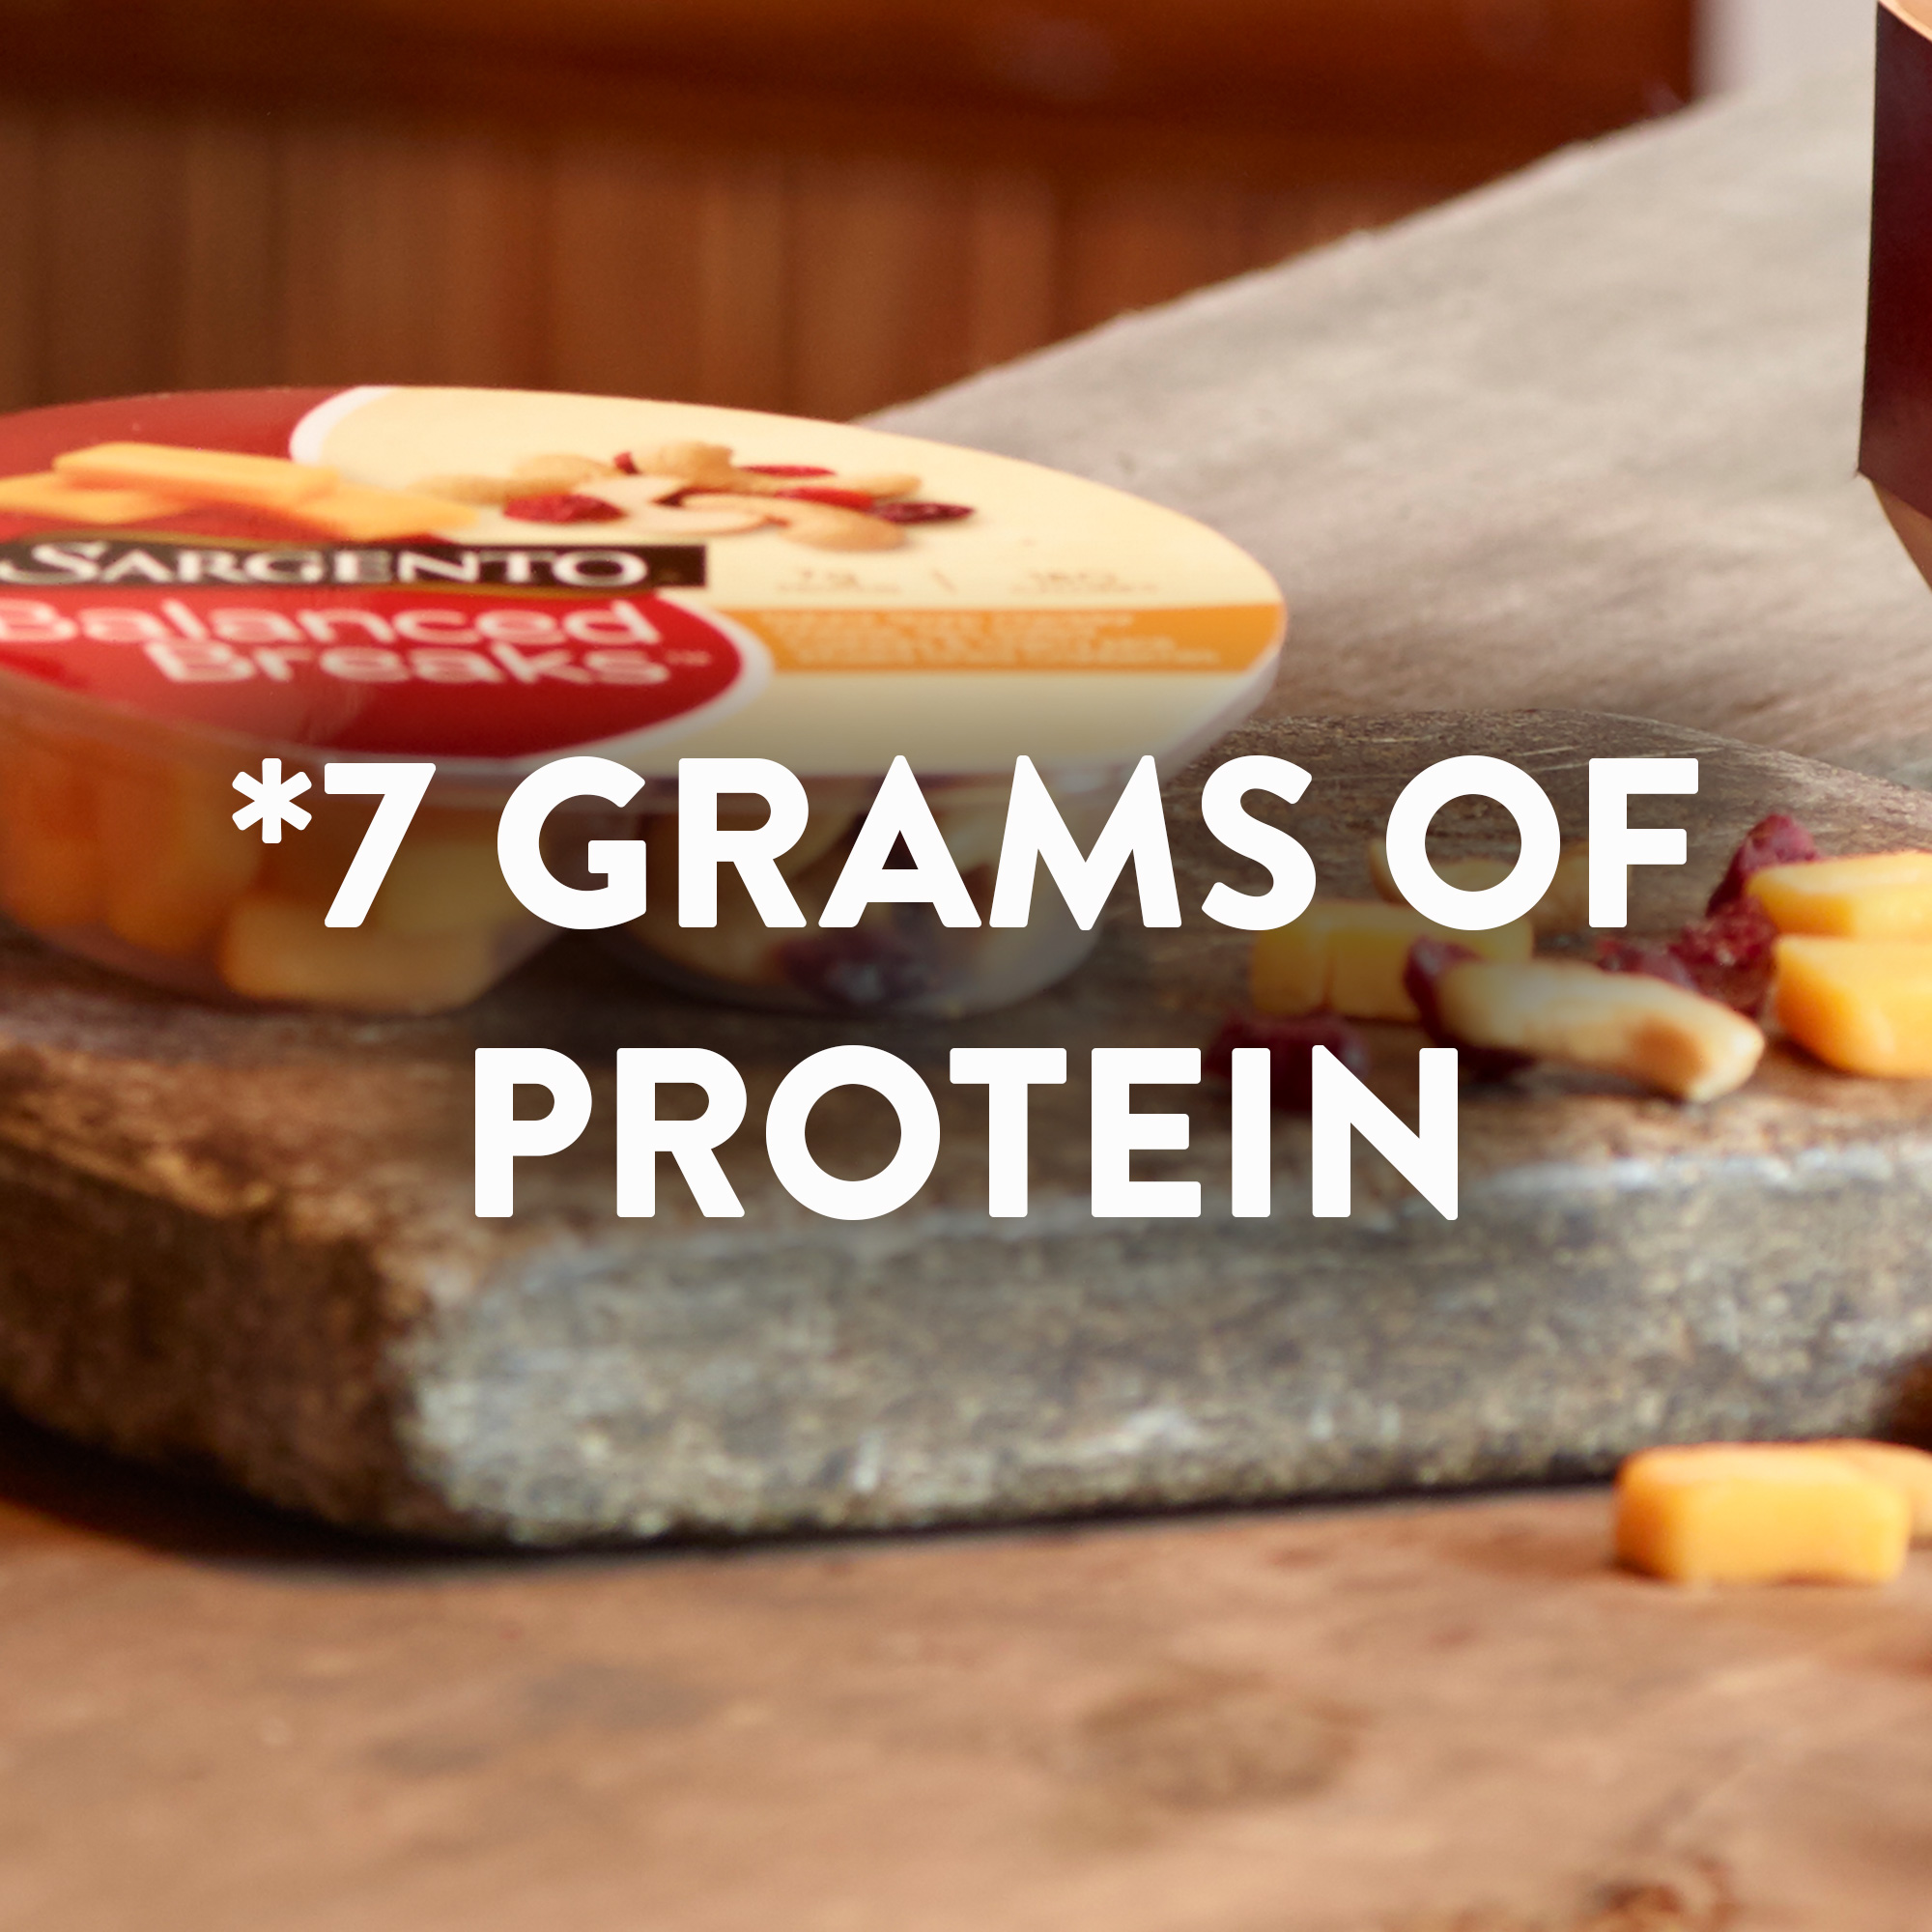 Sargento® Balanced Breaks®, Natural Sharp Cheddar Cheese, Sea-Salted Cashews and Cherry Juice-Infused Dried Cranberries